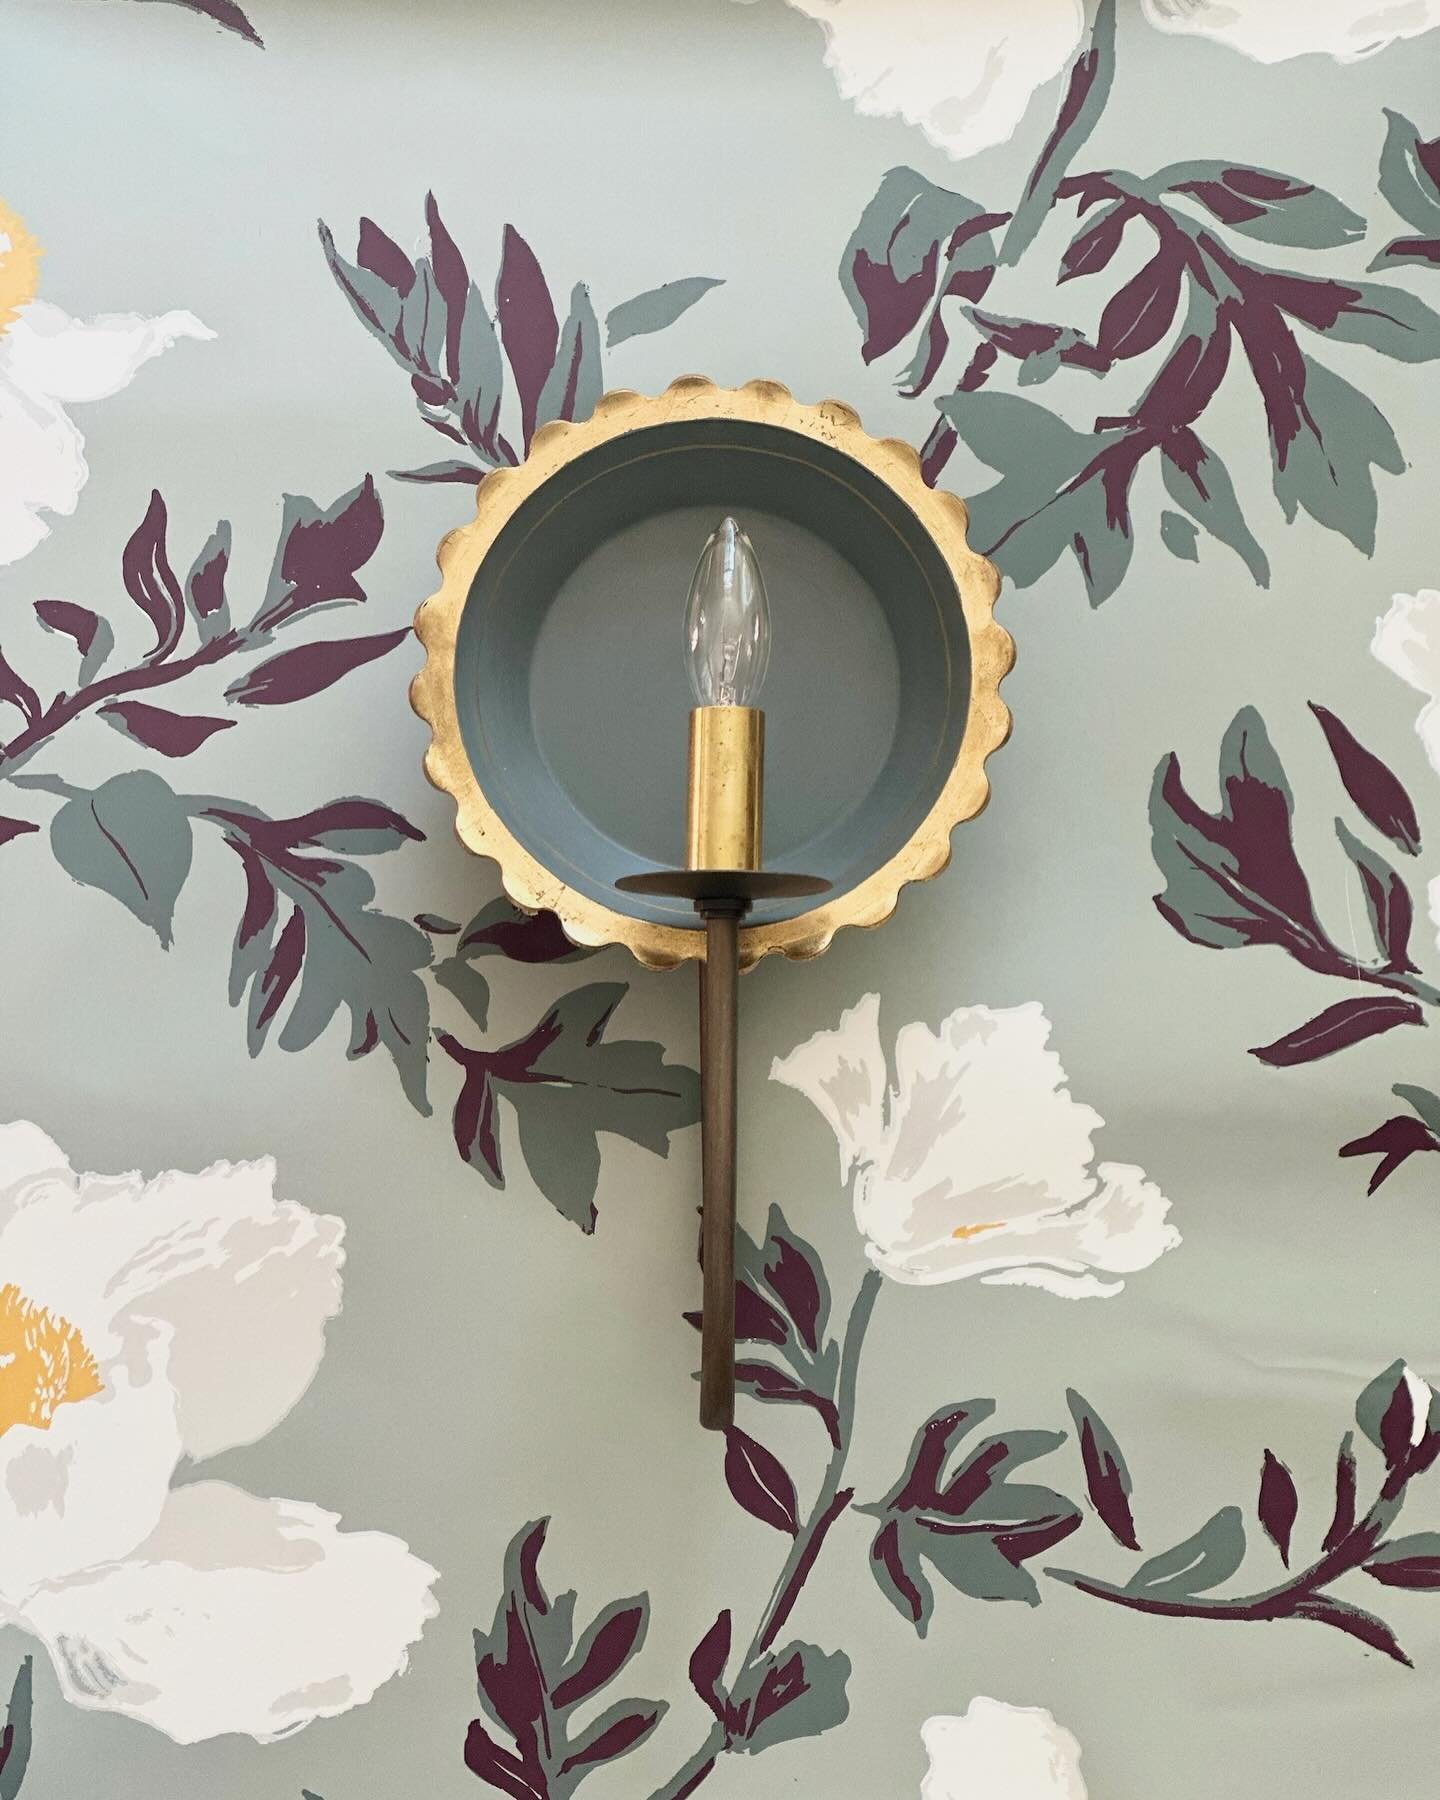 To celebrate the introduction of Matilija Seacliff, the newest colorway of Matilija wallpaper from @lakeaugust, we&rsquo;ve paired it with two of our favorite handpainted sconces from our friends at Pared Lighting.✨

Matilija is a tribute to the dram